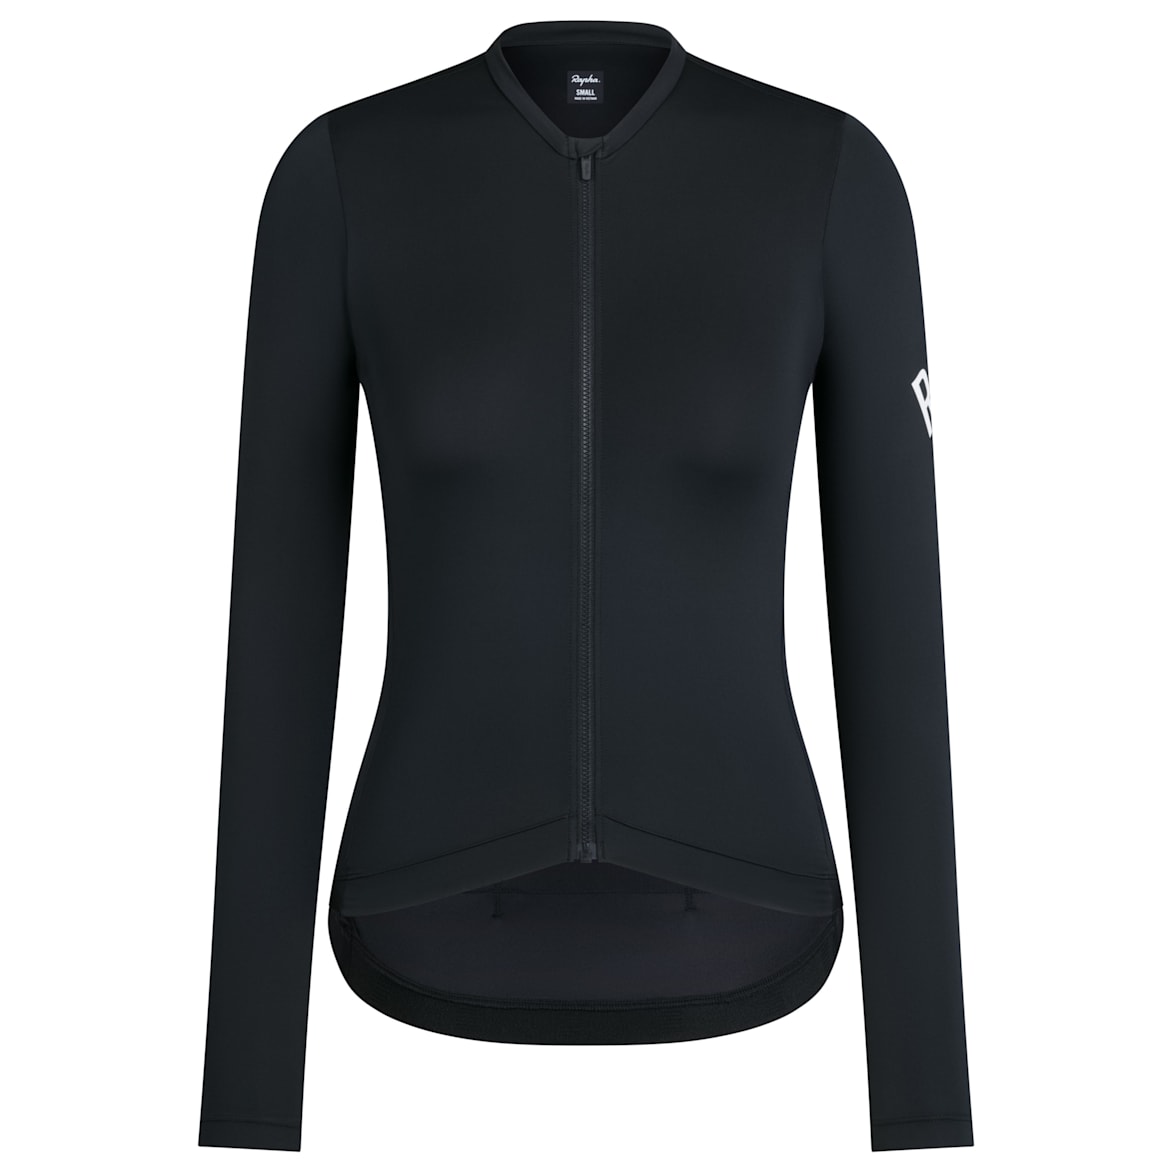 Clothing and Accessories | Rapha